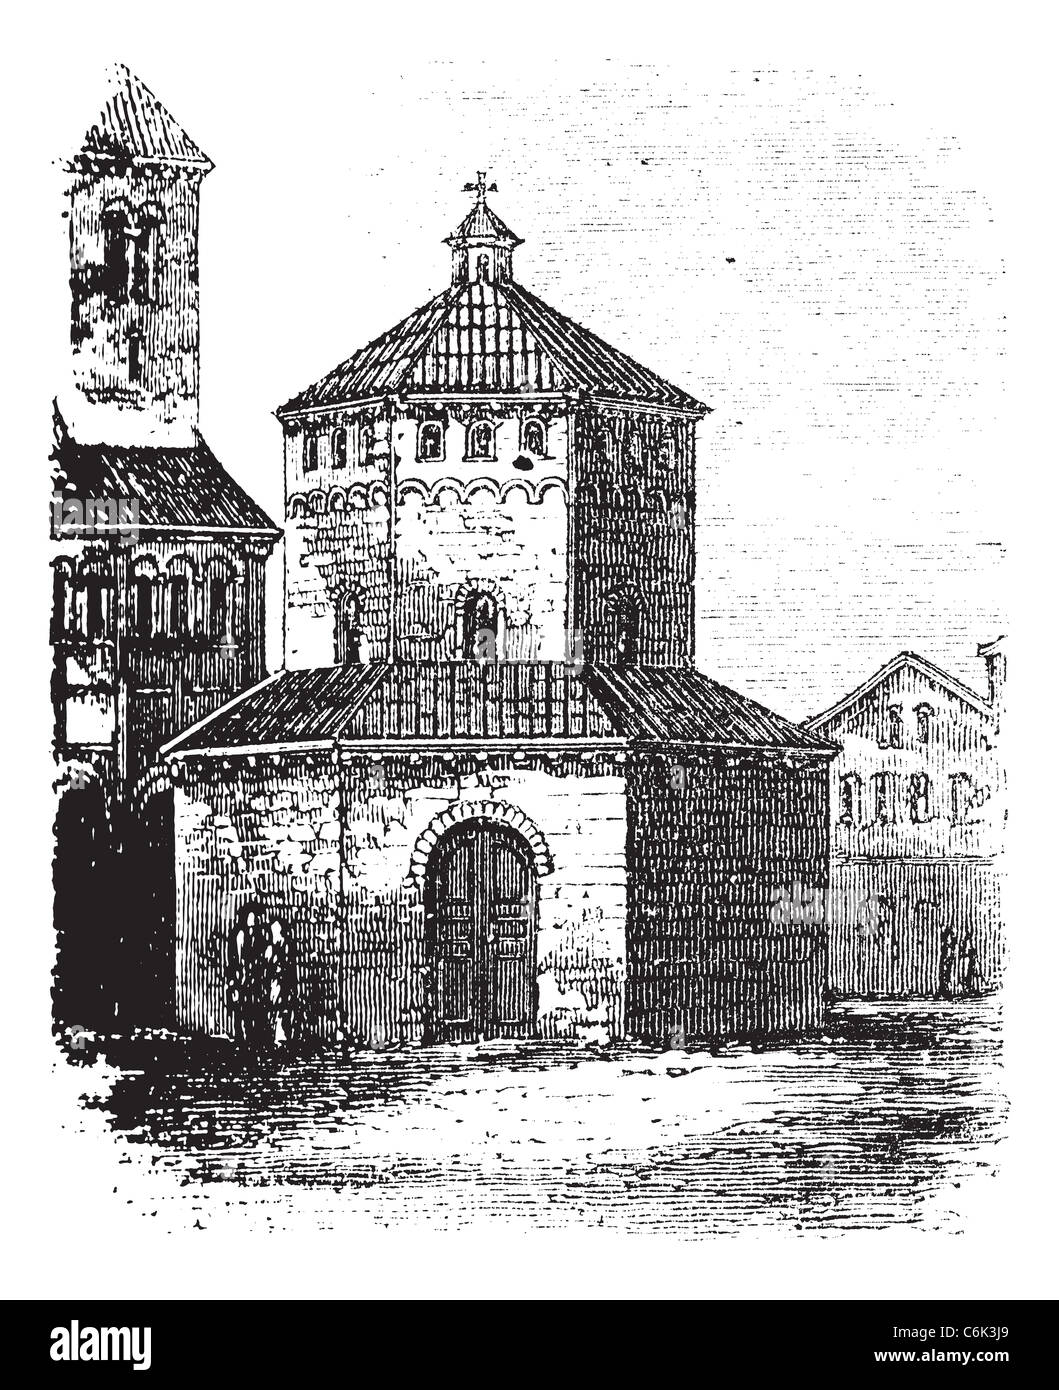 Baptistry of Novara, in Piedmont, during the 1890s, vintage engraving. Old engraved illustration of the Baptistry of Novara. Stock Photo